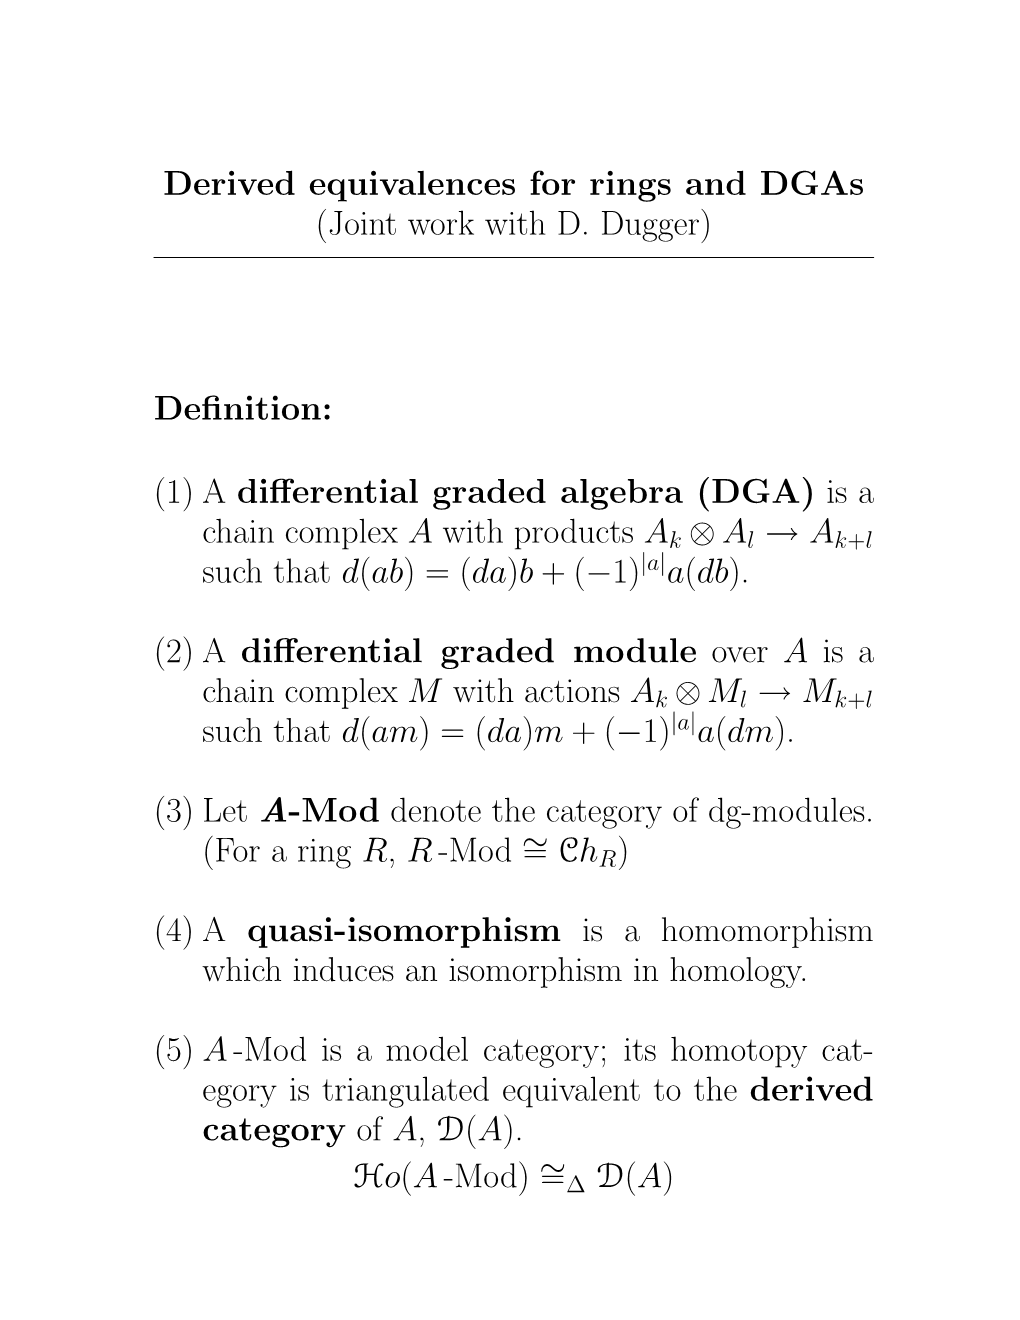 Derived Equivalences for Rings and Dgas (Joint Work with D. Dugger)